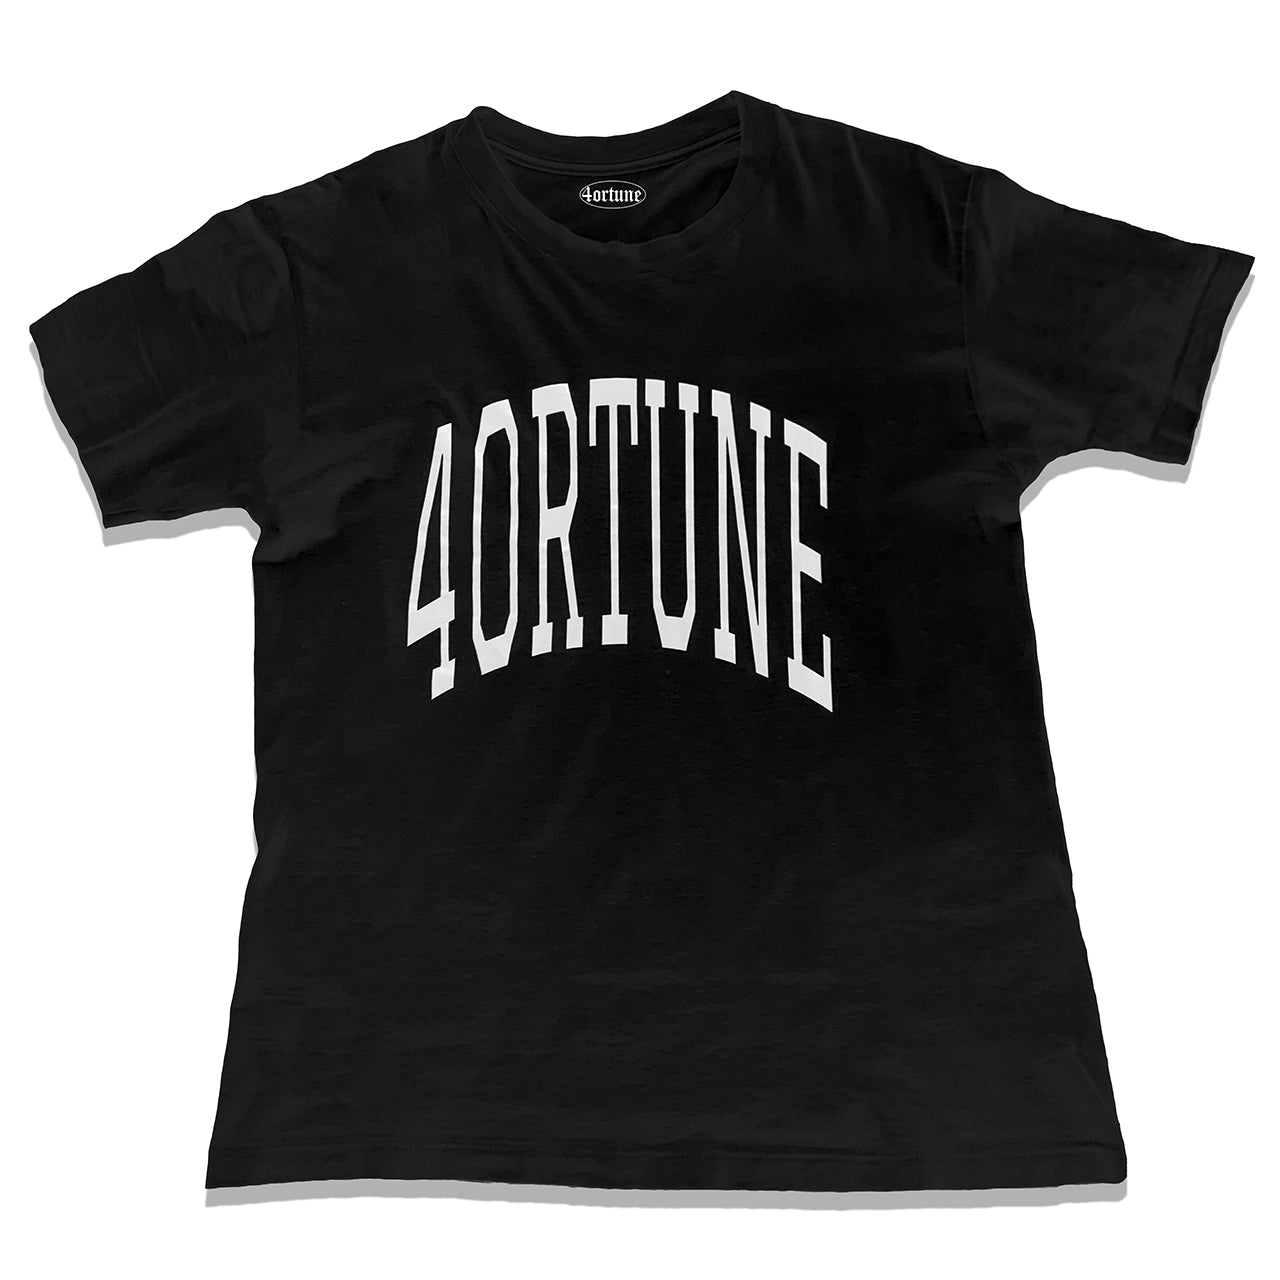 4ortune Arch T-Shirt